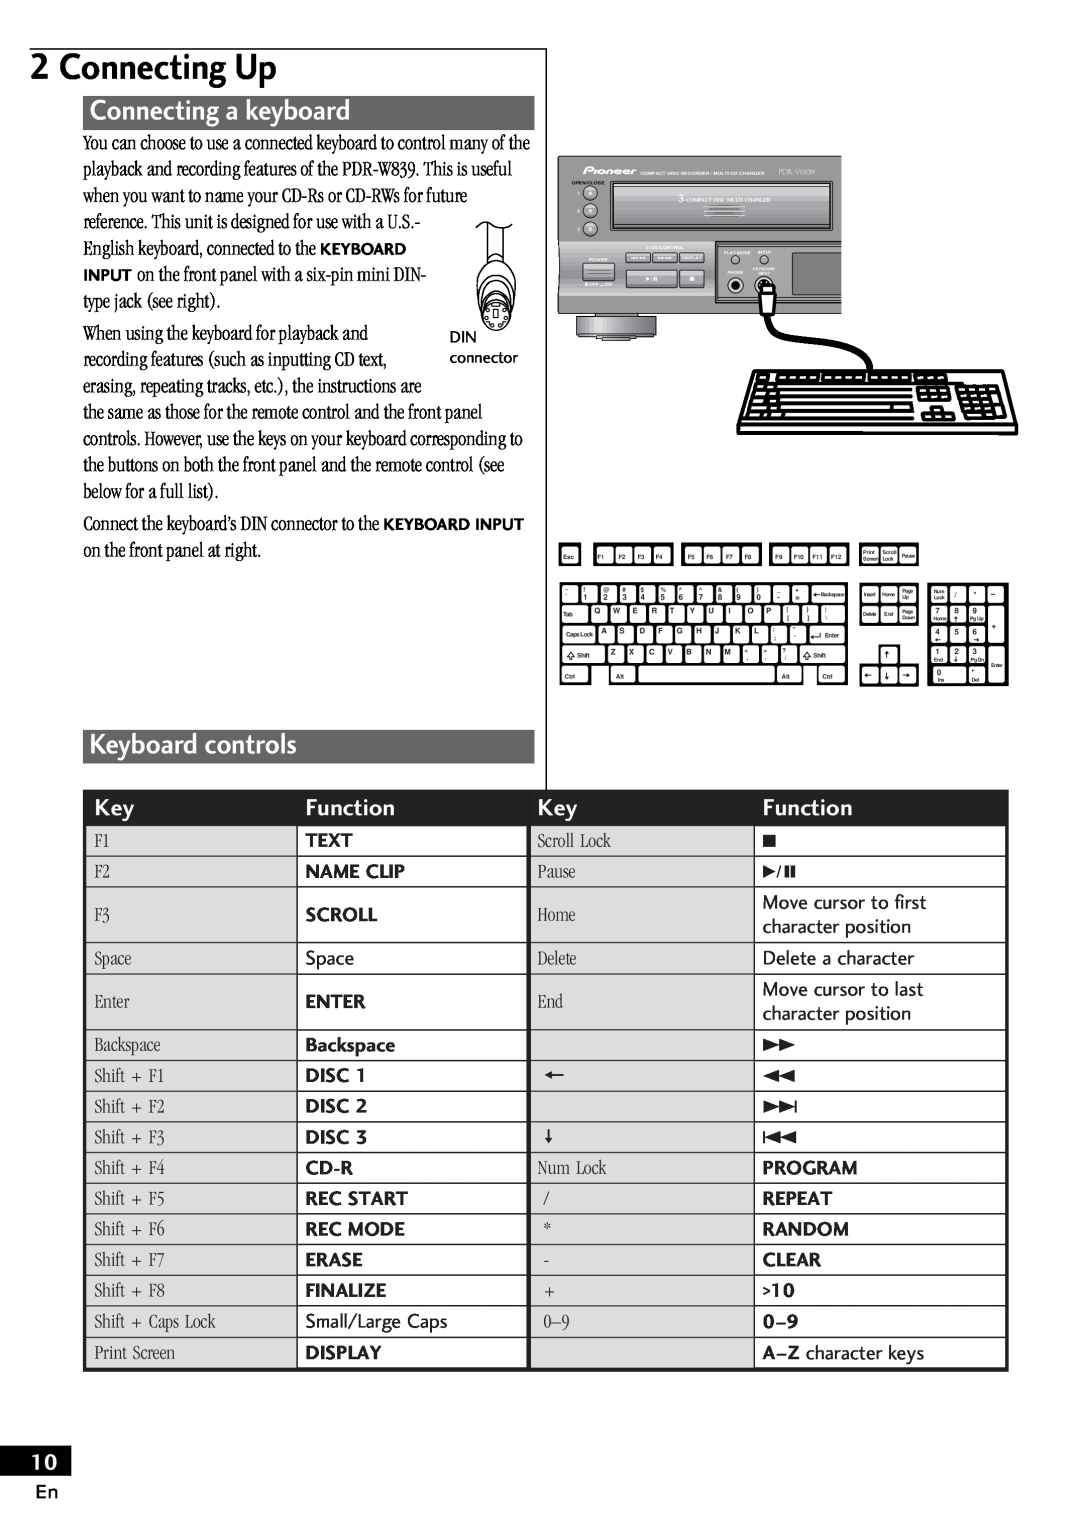 Pioneer PDR-W839 manual Connecting a keyboard, Keyboard controls, Connecting Up, Function, type jack see right 